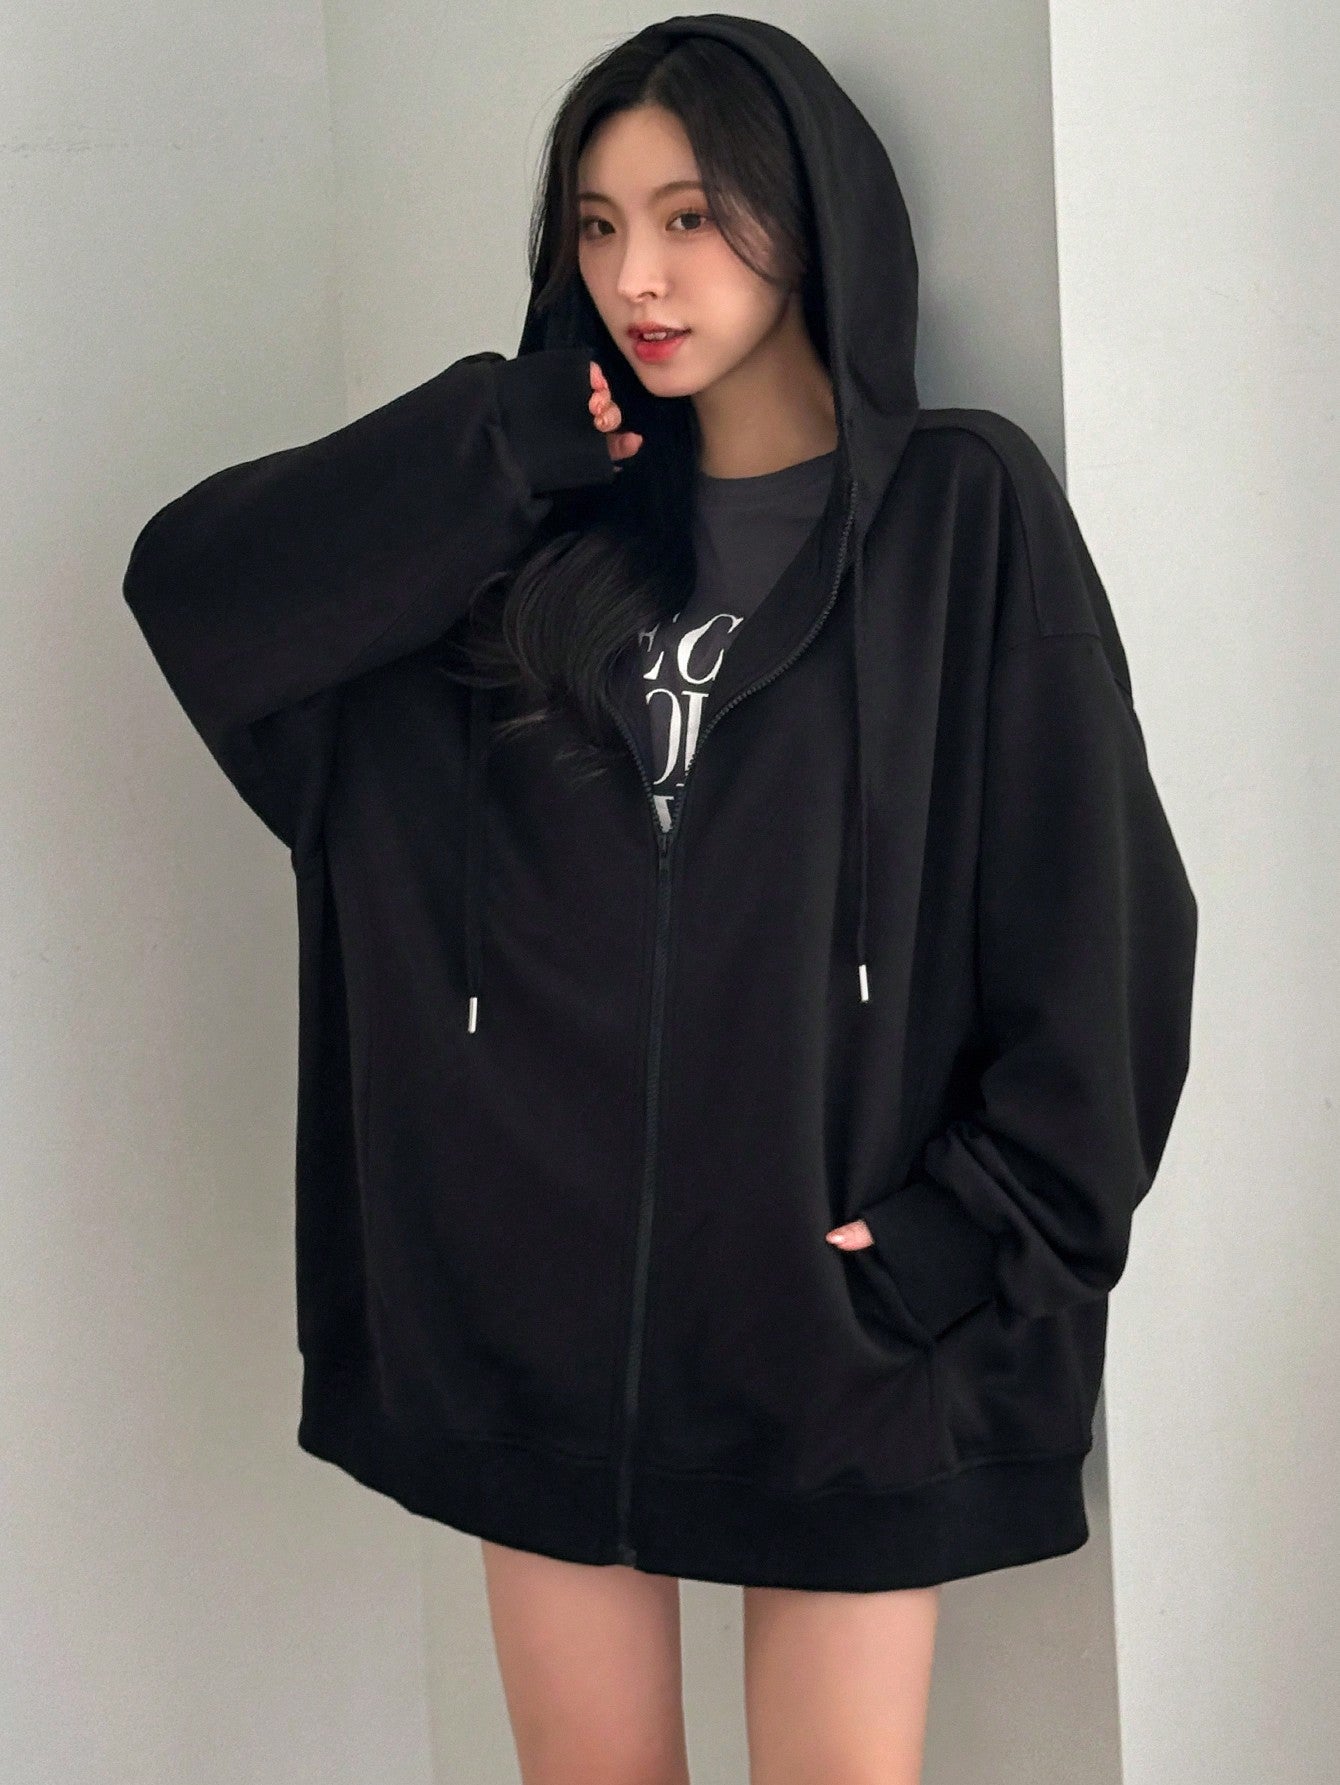 Women's Loose Fit Hooded Sweatshirt With Drawstring And Letter Print